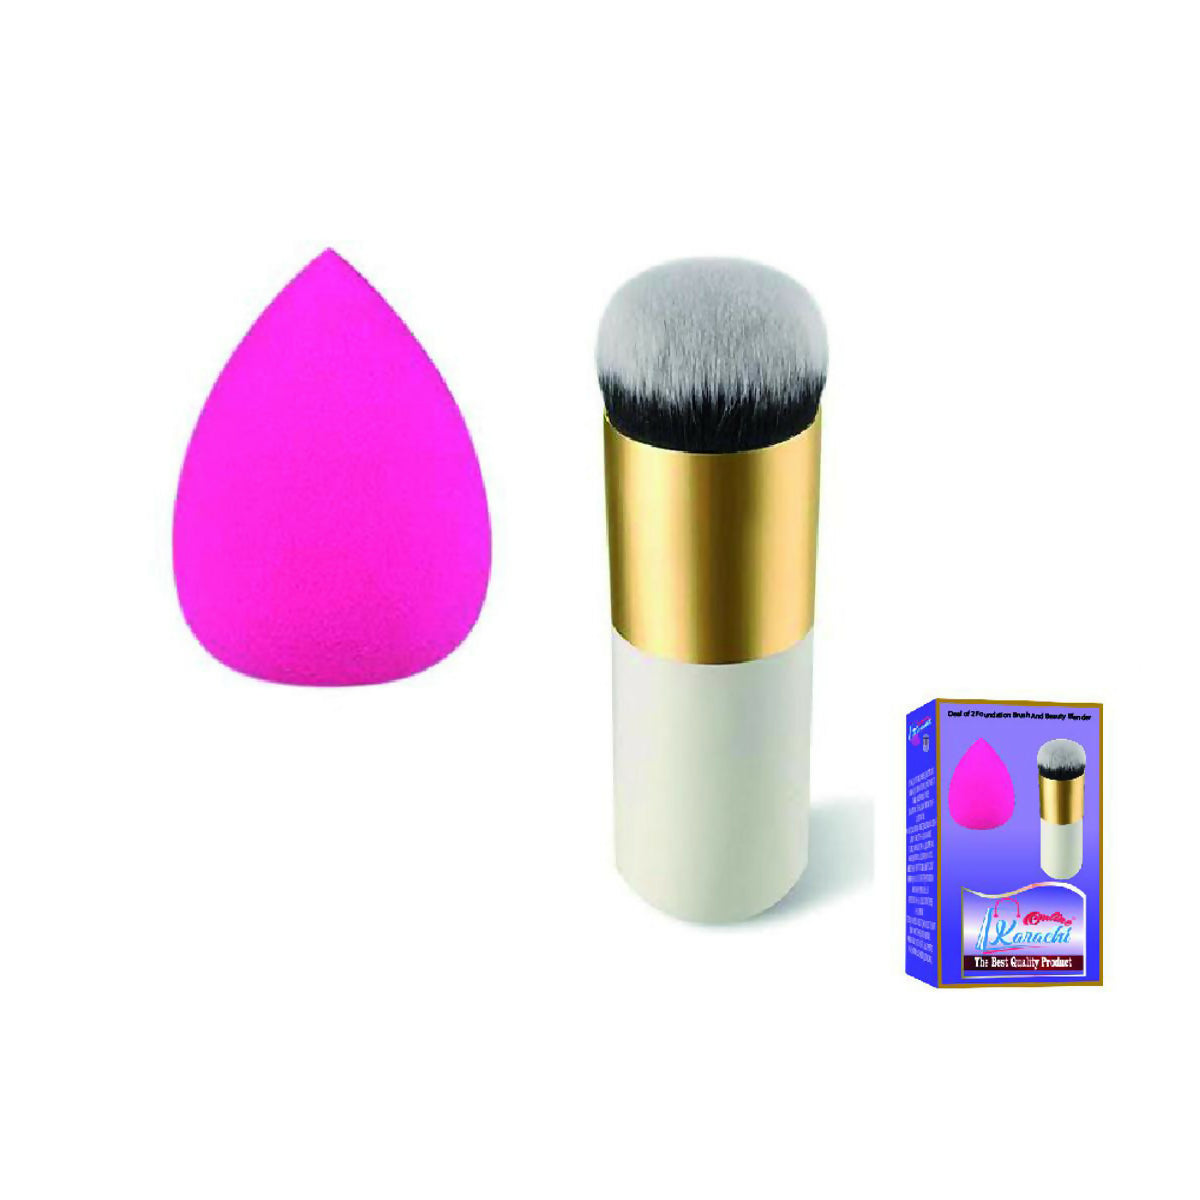 Deal of 2 Foundation Brush And Beauty Blender | Makeup Kit Chubby Pier Foundation Brush And Sponge - ValueBox